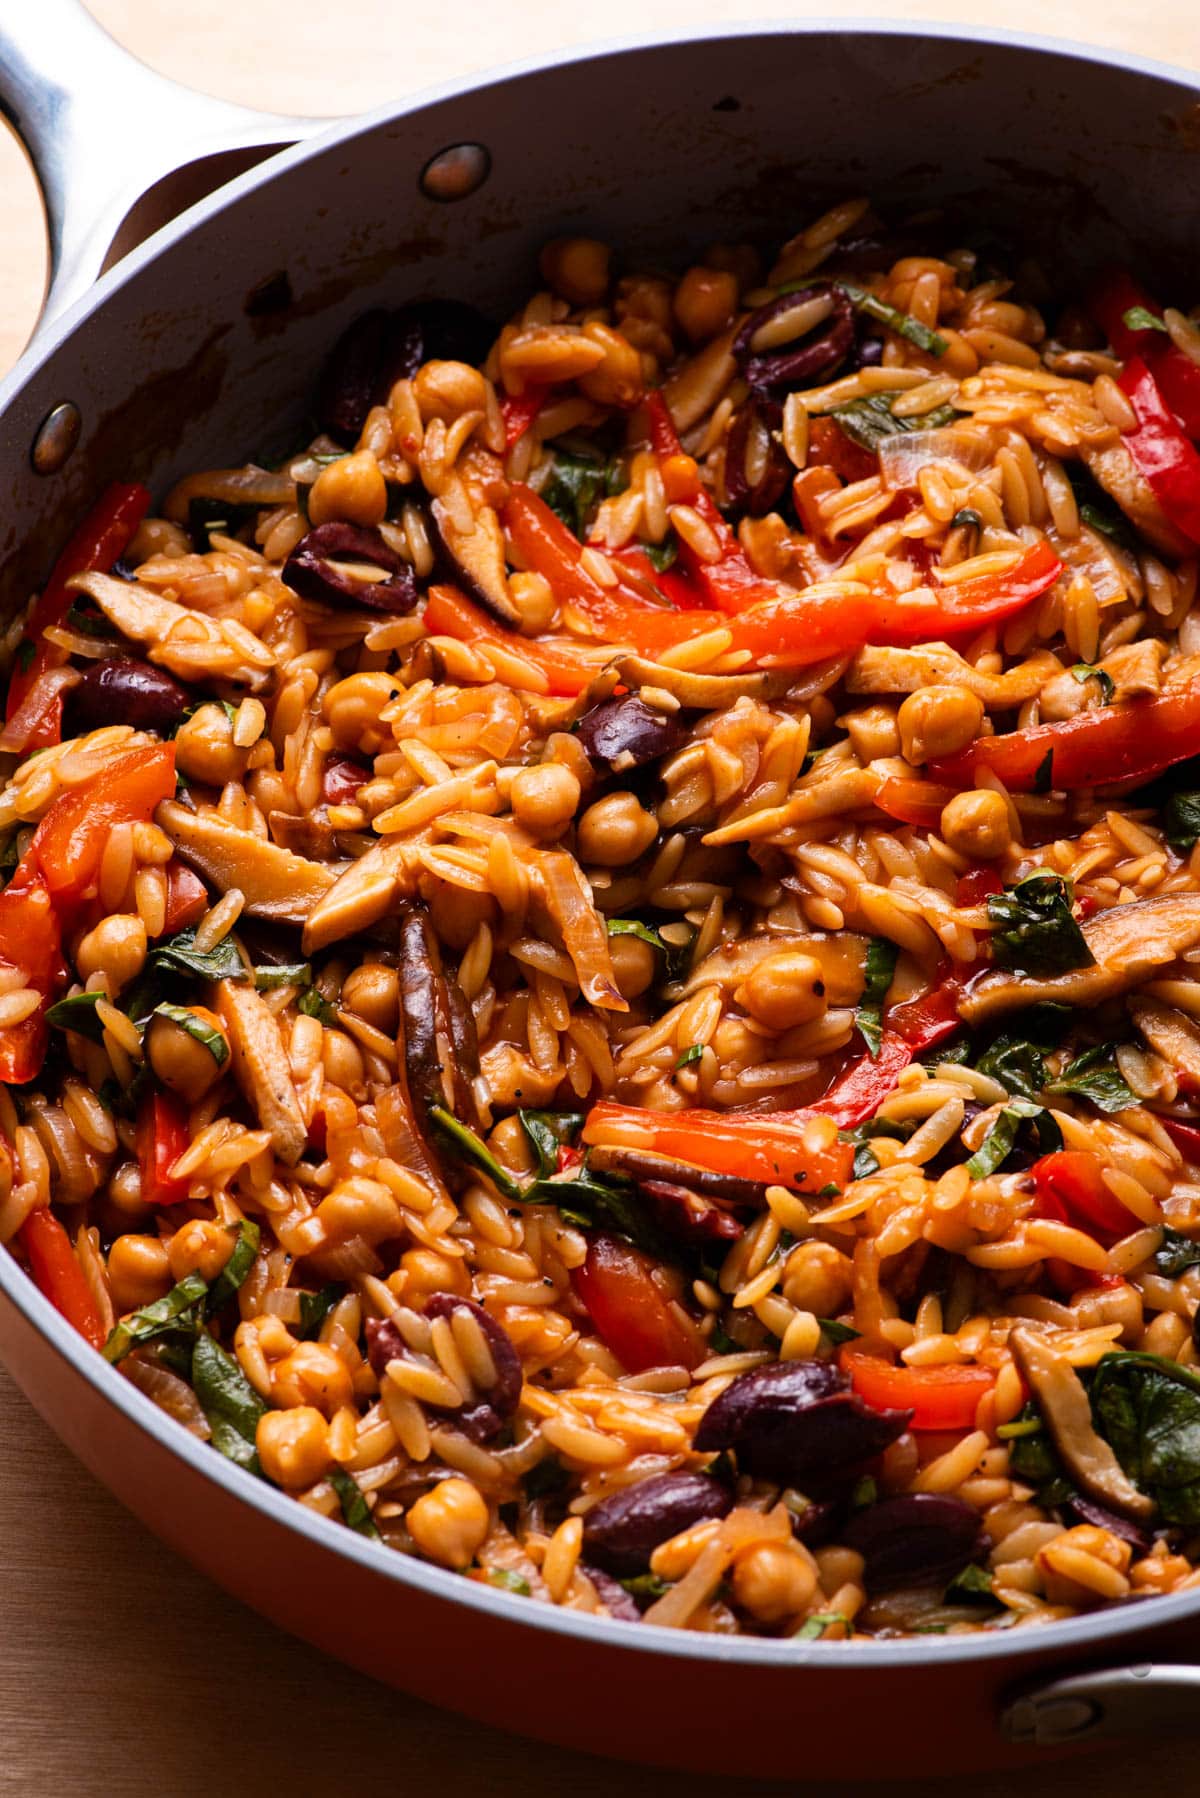 Baked Greek orzo in a skillet, with tomato sauce, olives, mushrooms, and chickpeas.